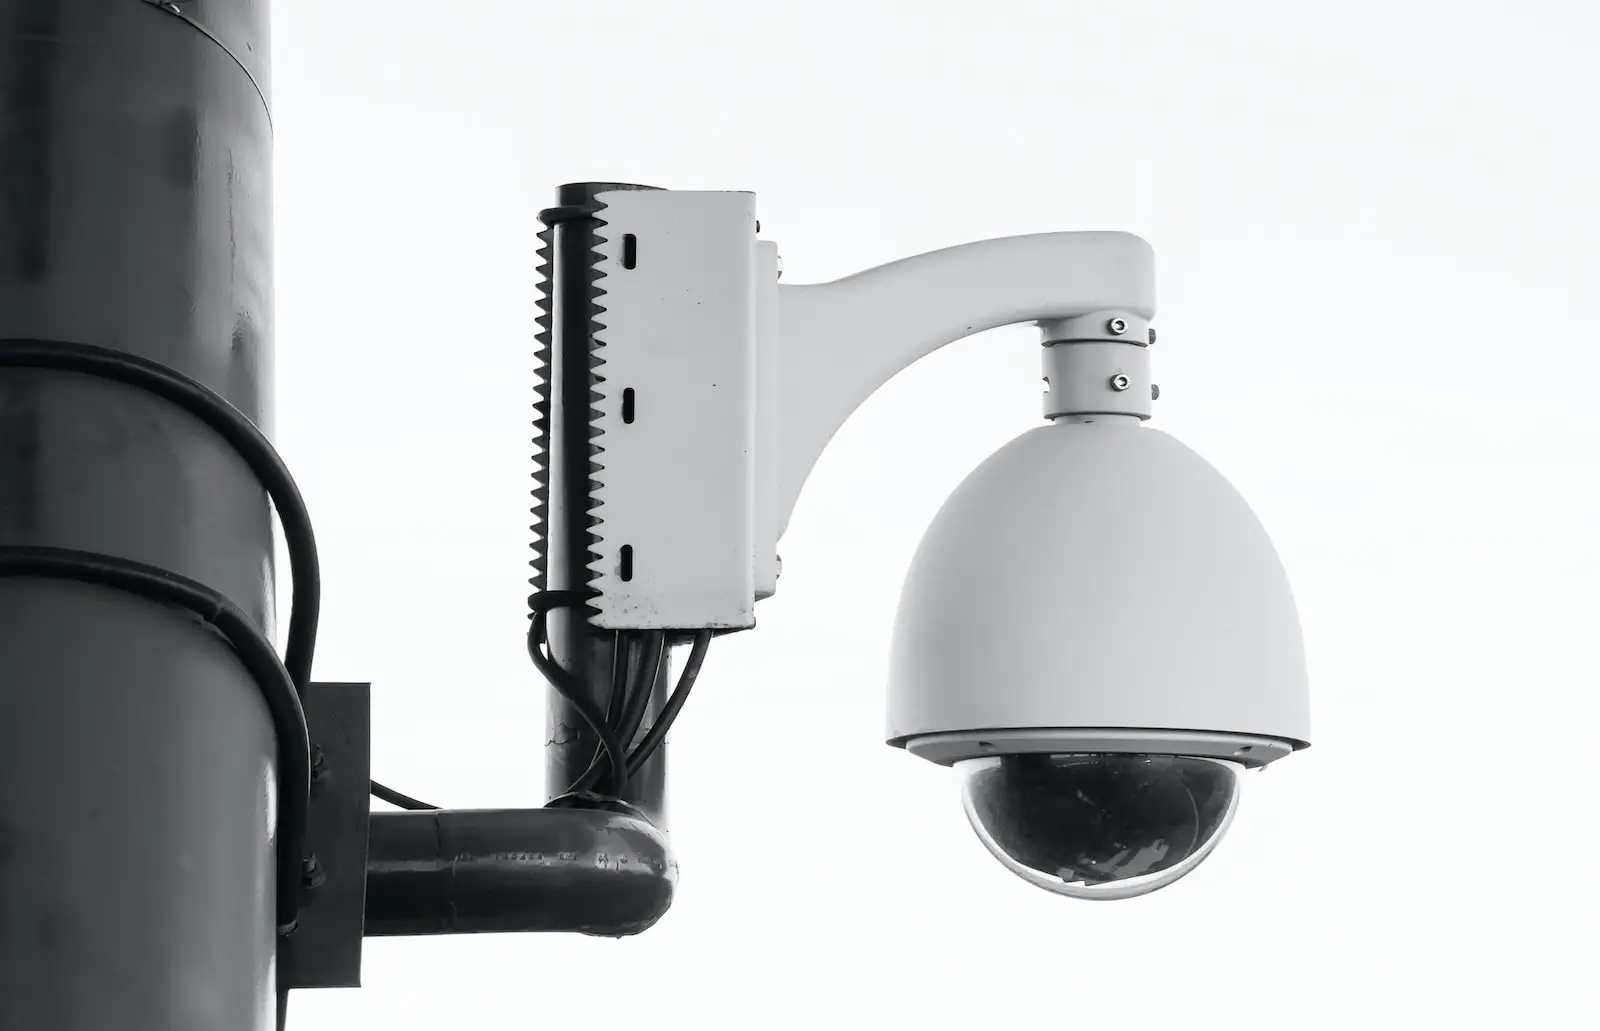 Benefits of Installing Security Cameras